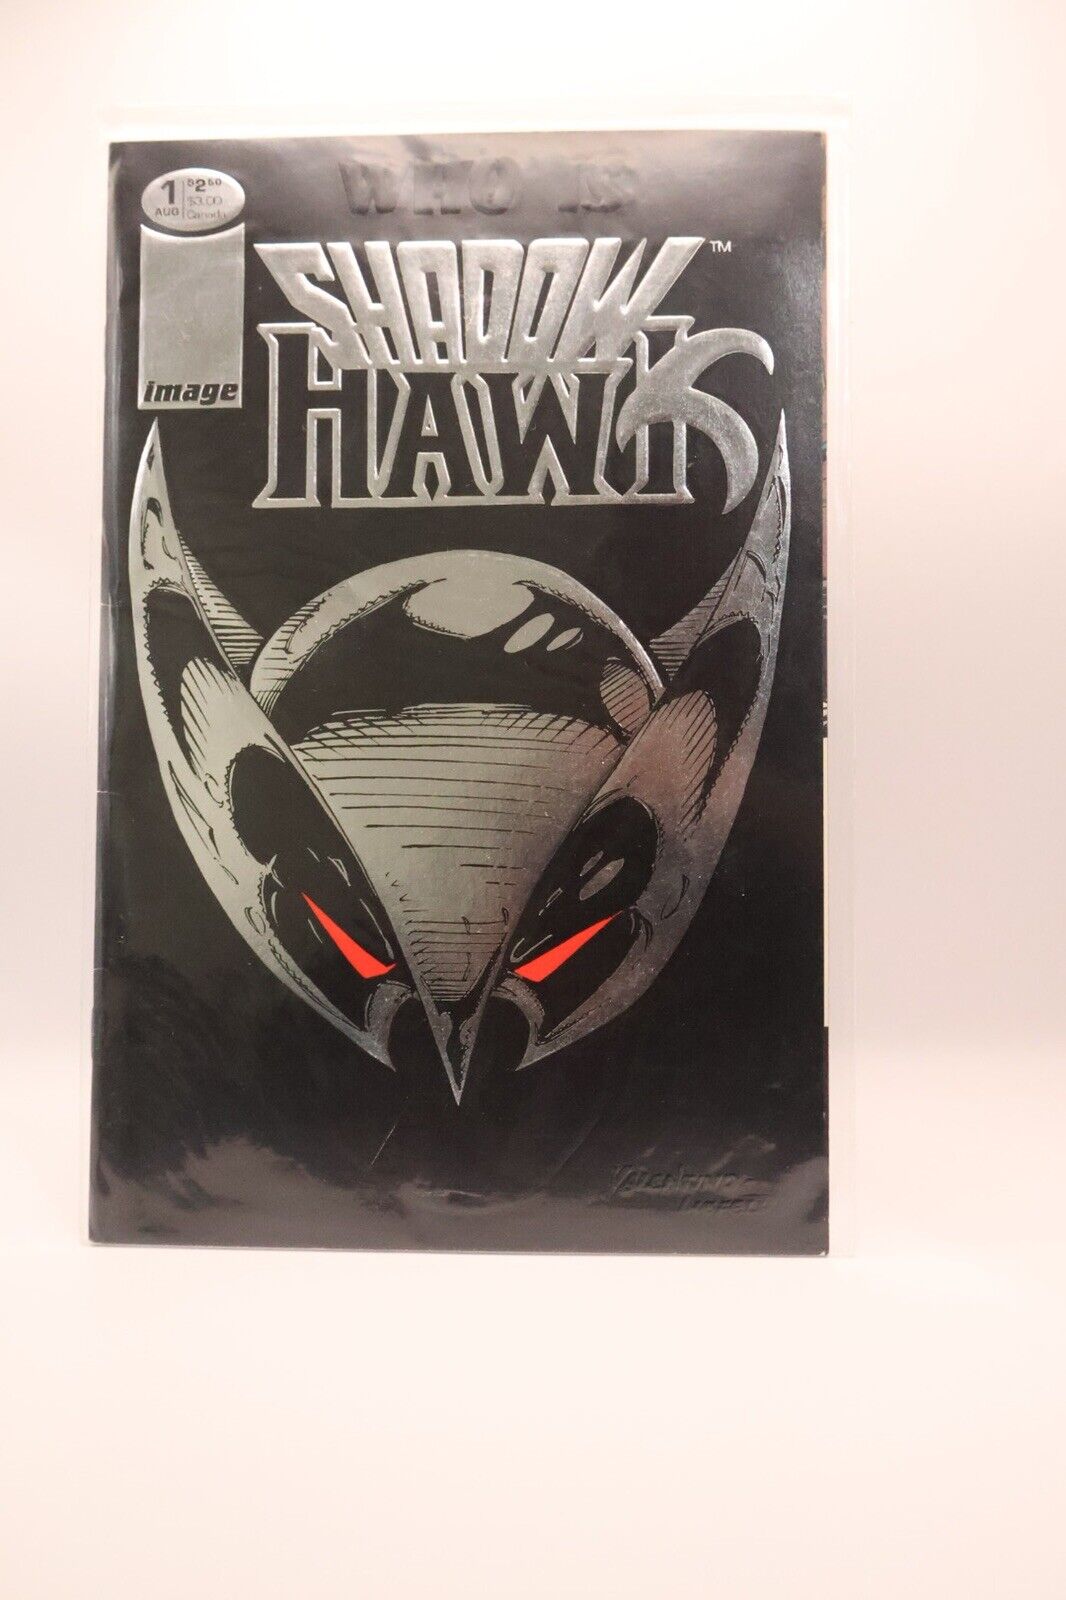 SHADOW HAWK #1 August 1992 EMBOSSED SILVER FOIL  Image Comics Good/Reader Cond.